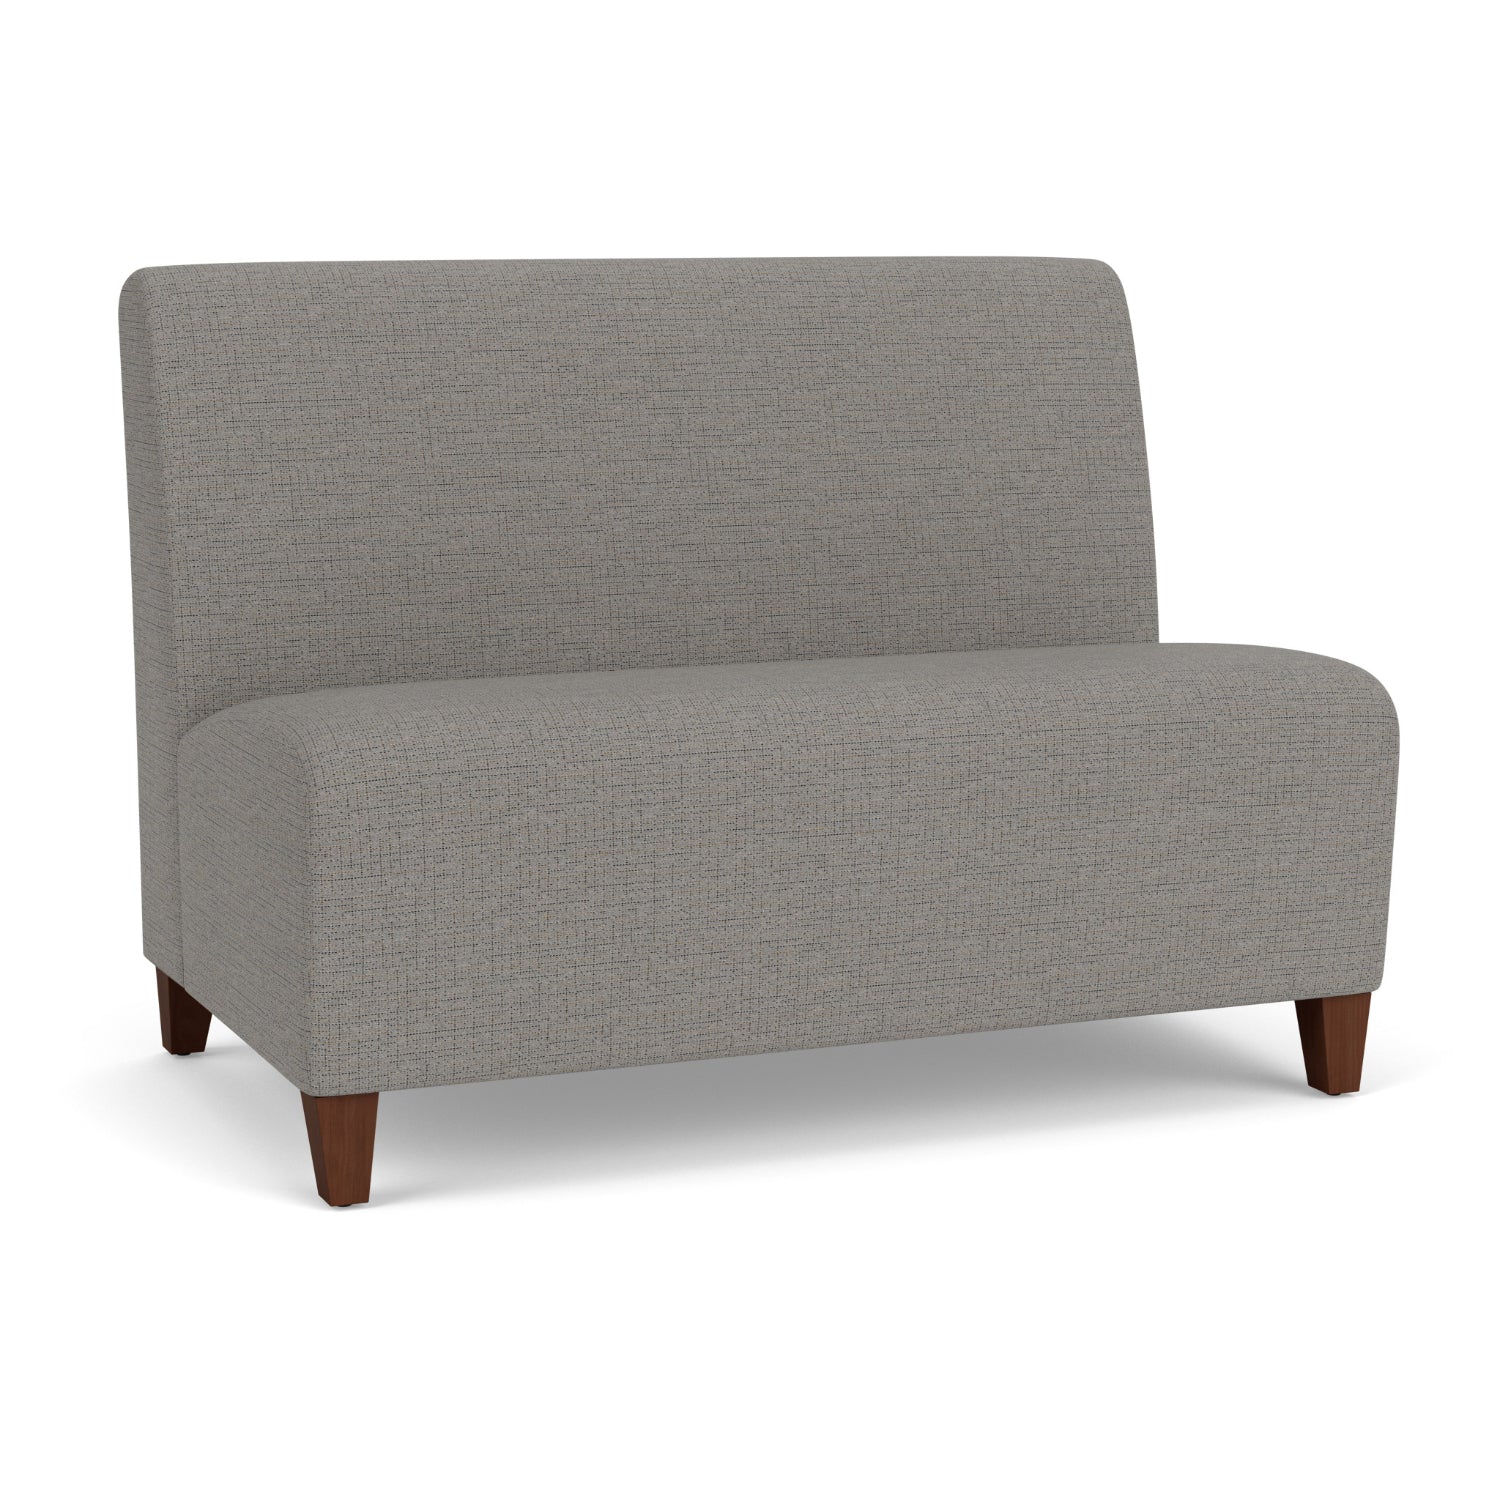 Siena Collection Reception Seating, Armless Loveseat, Designer Fabric Upholstery, FREE SHIPPING